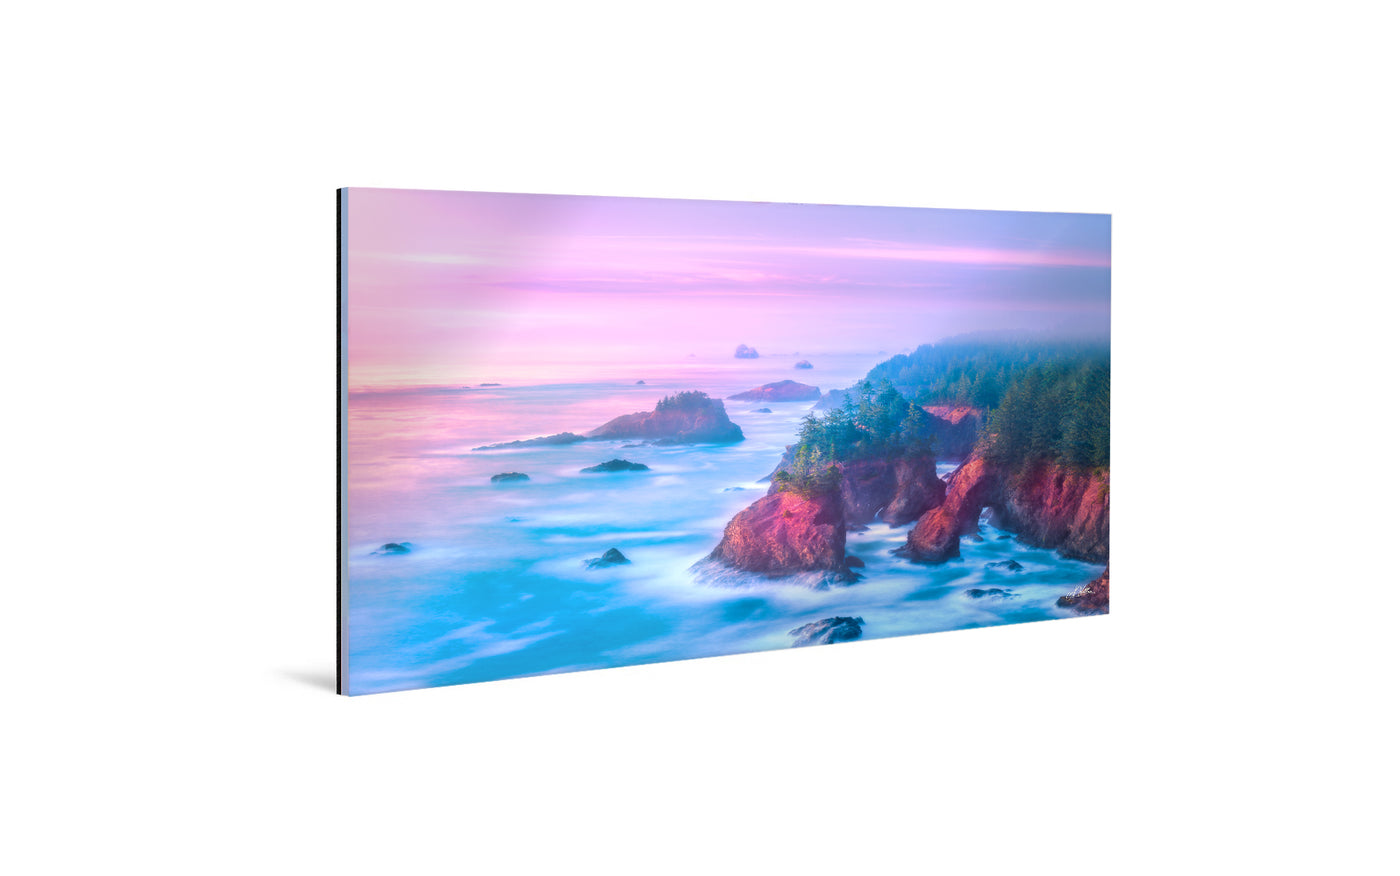 Fine Art Photography | Limited-Edition Museum-Quality Acrylic Print | "Islands N 1"